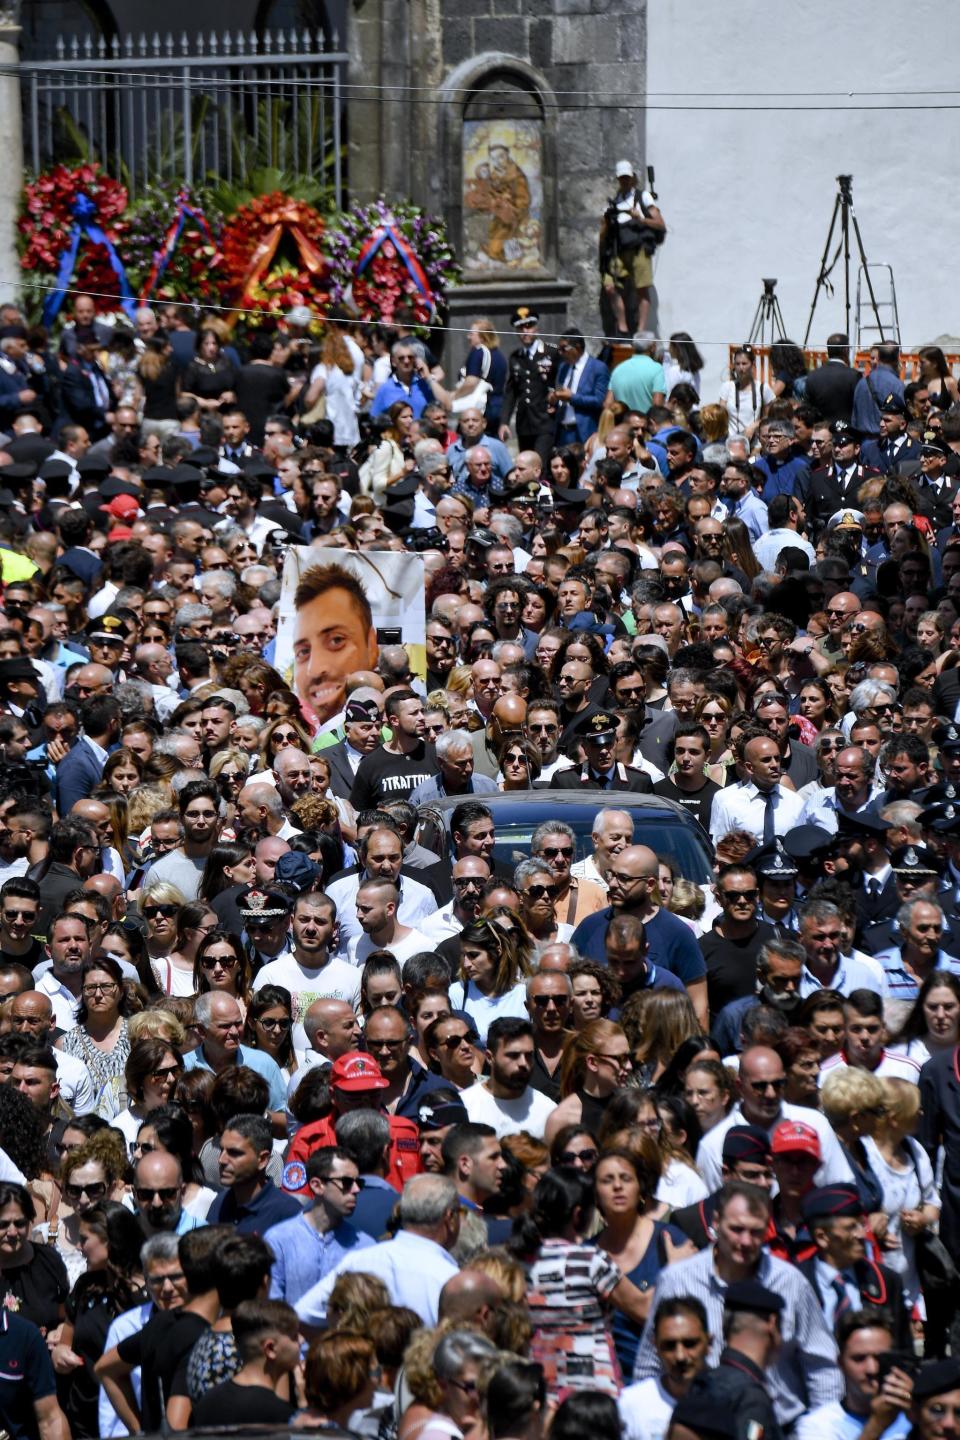 The picture of Carabinieri's officer Mario Cerciello Rega is shown during his funeral in his hometown of Somma Vesuviana, near Naples, southern Italy, Monday, July 29, 2019. Two American teenagers were jailed in Rome on Saturday as authorities investigate their alleged roles in the fatal stabbing of the Italian police officer on a street near their hotel. (Ciro Fusco/ANSA via AP)